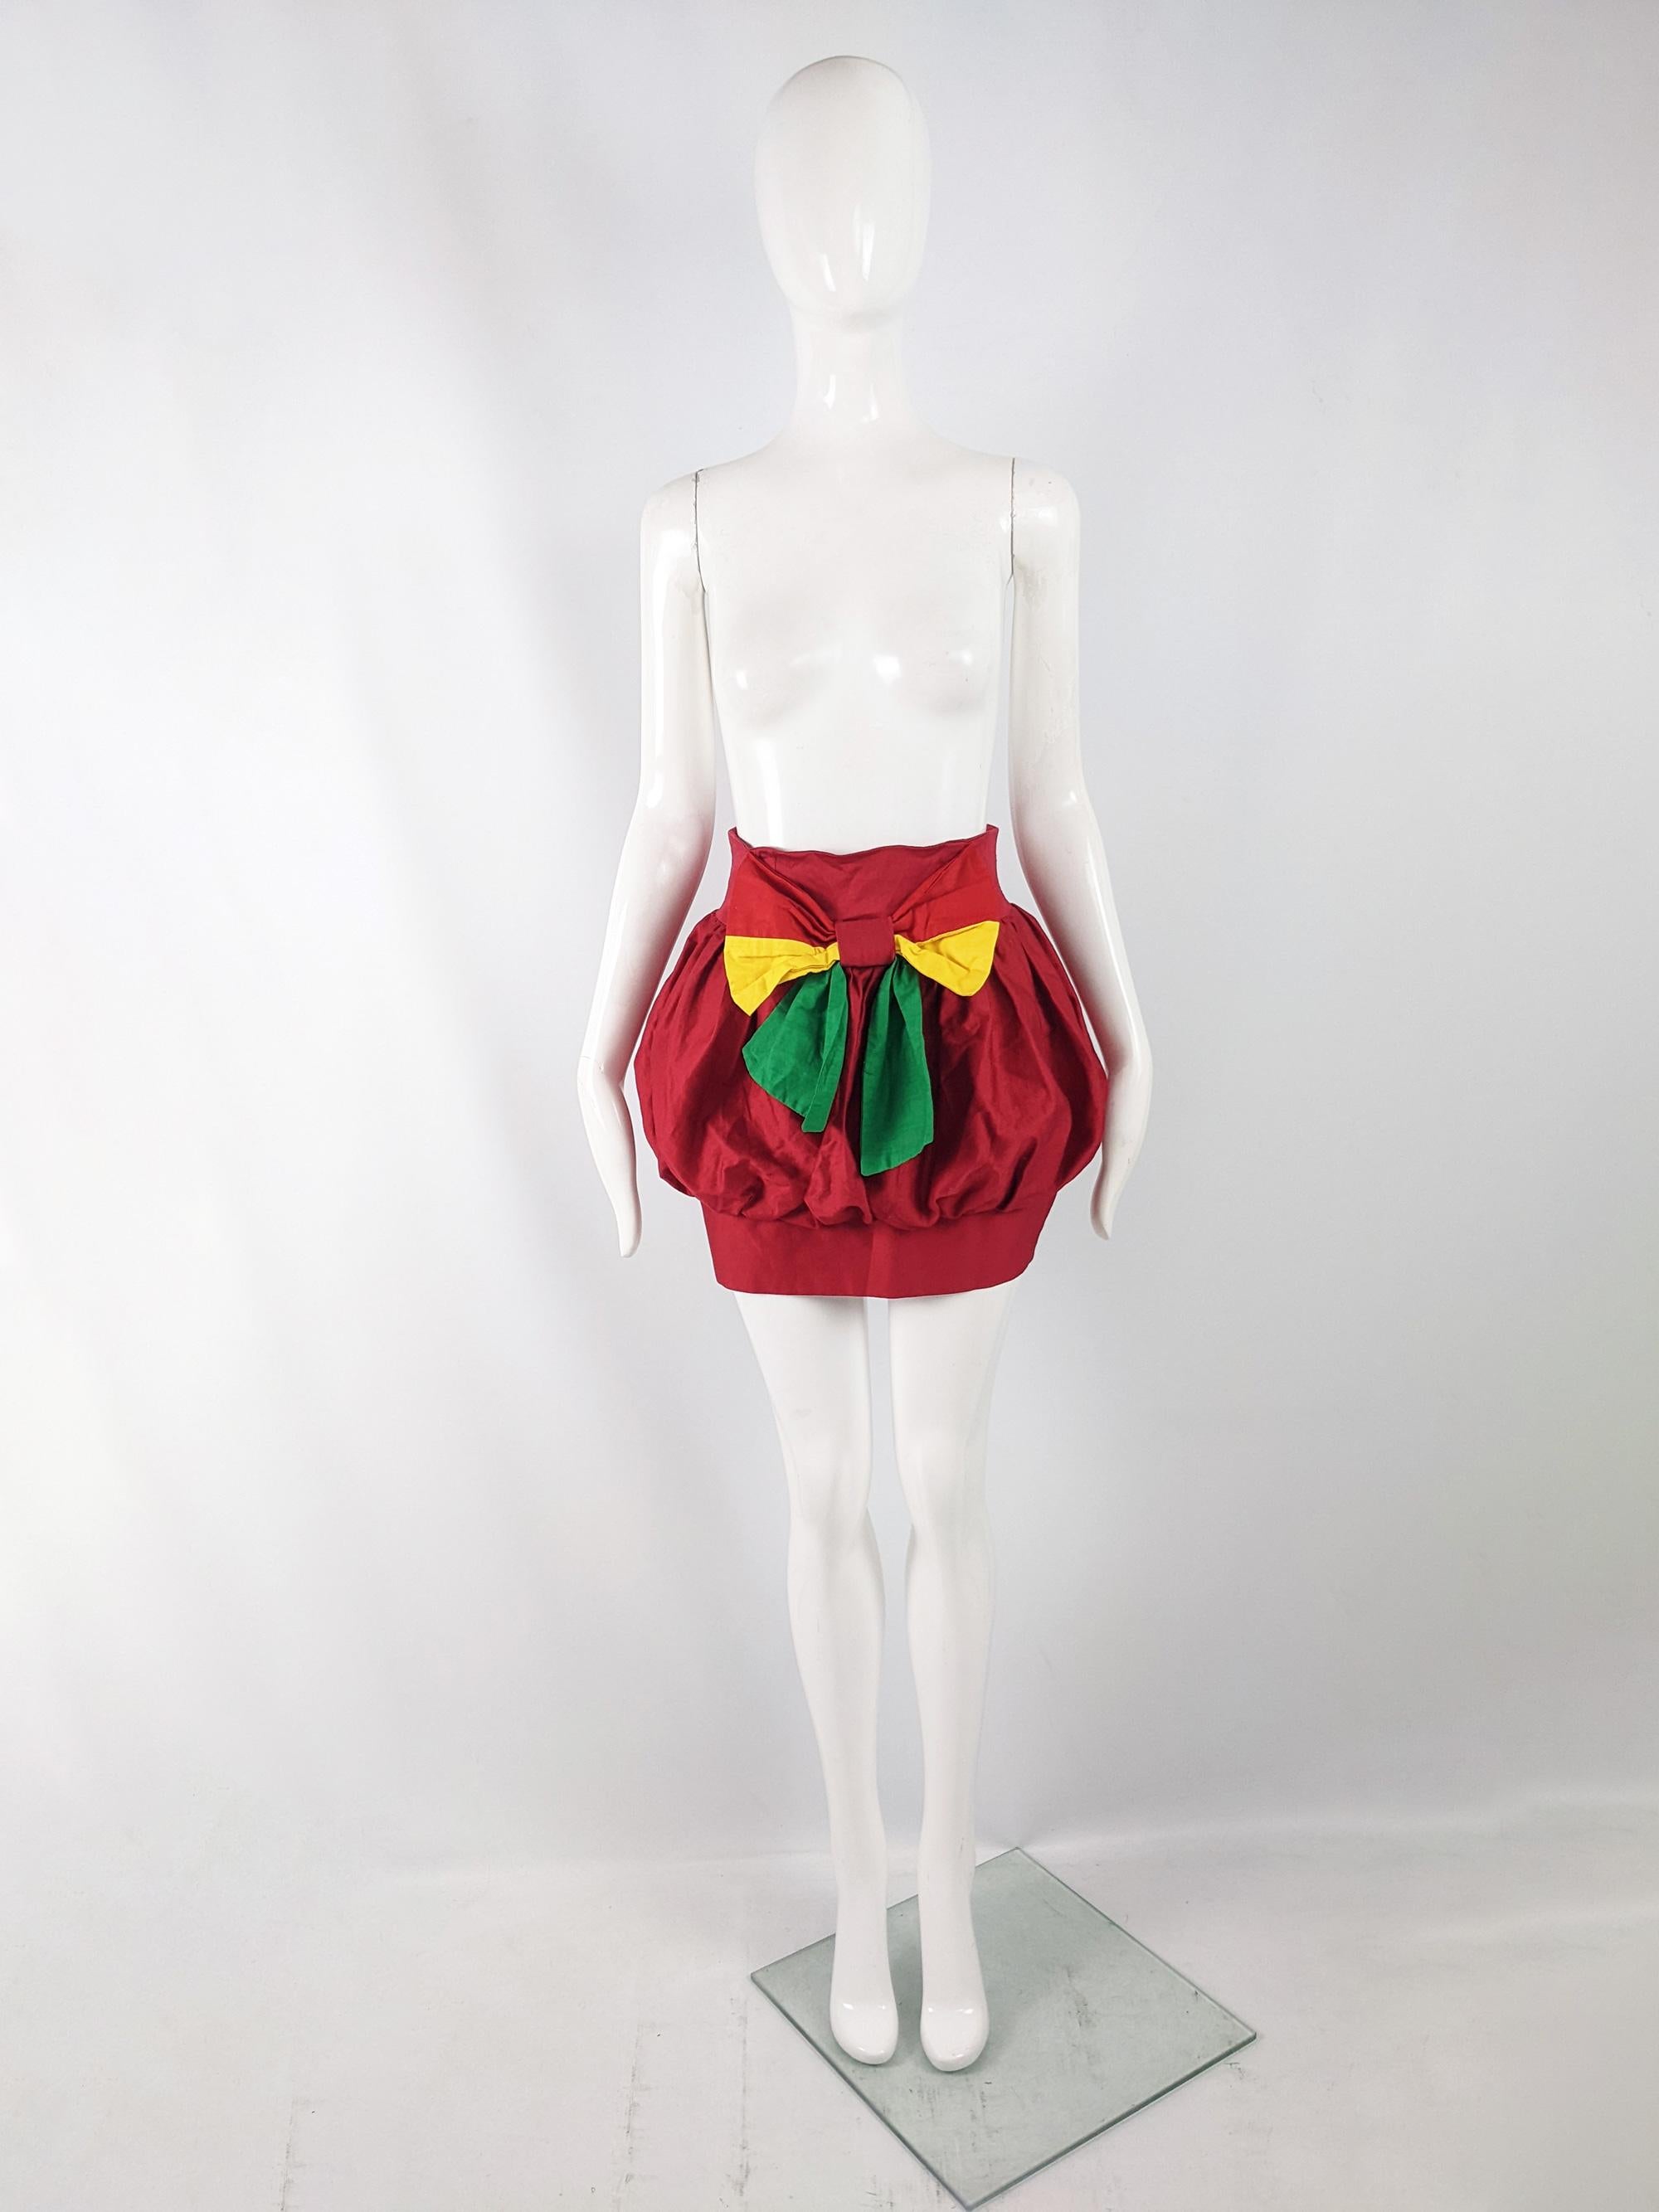 A sexy vintage womens mini bubble skirt from the 80s in a red cotton with a dramatic bow to the front and a puffball silhouette that has a tight pencil/ wiggle like hem. Perfect for a party or evening event.

Size: Marked vintage 10 but measures